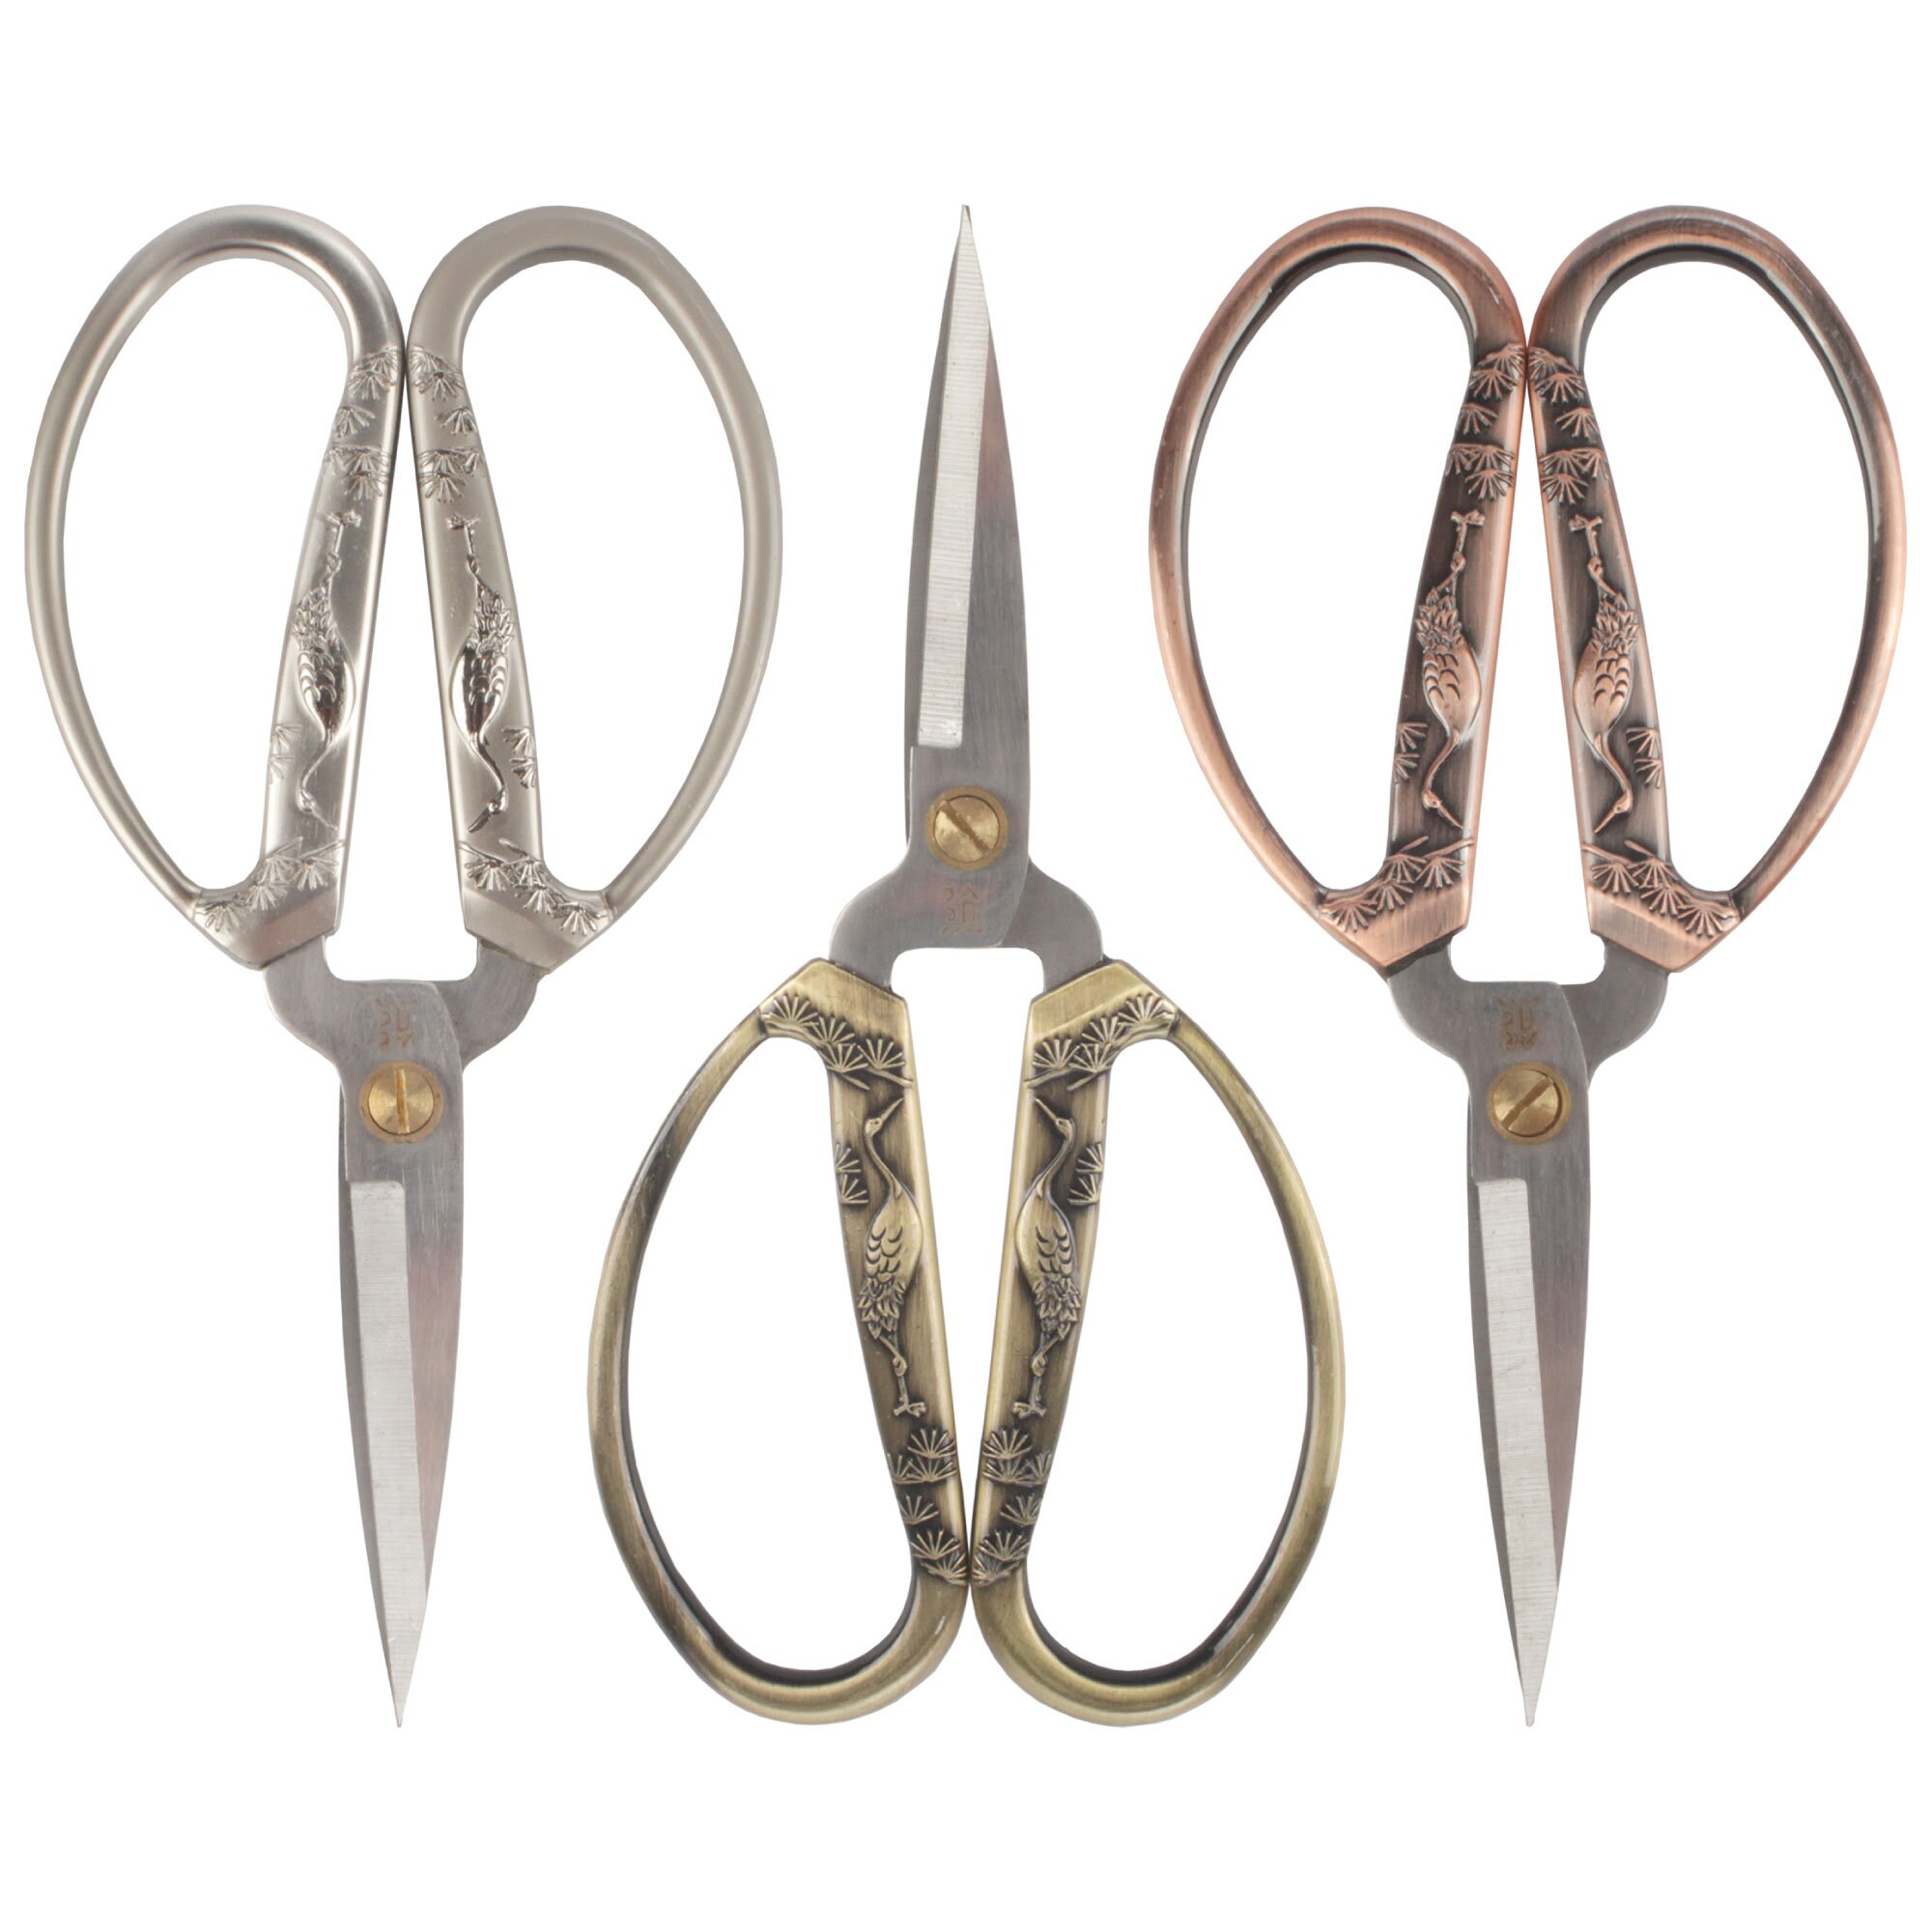 Embroidery Scissors with Decorative Scrollwork Motif Handles